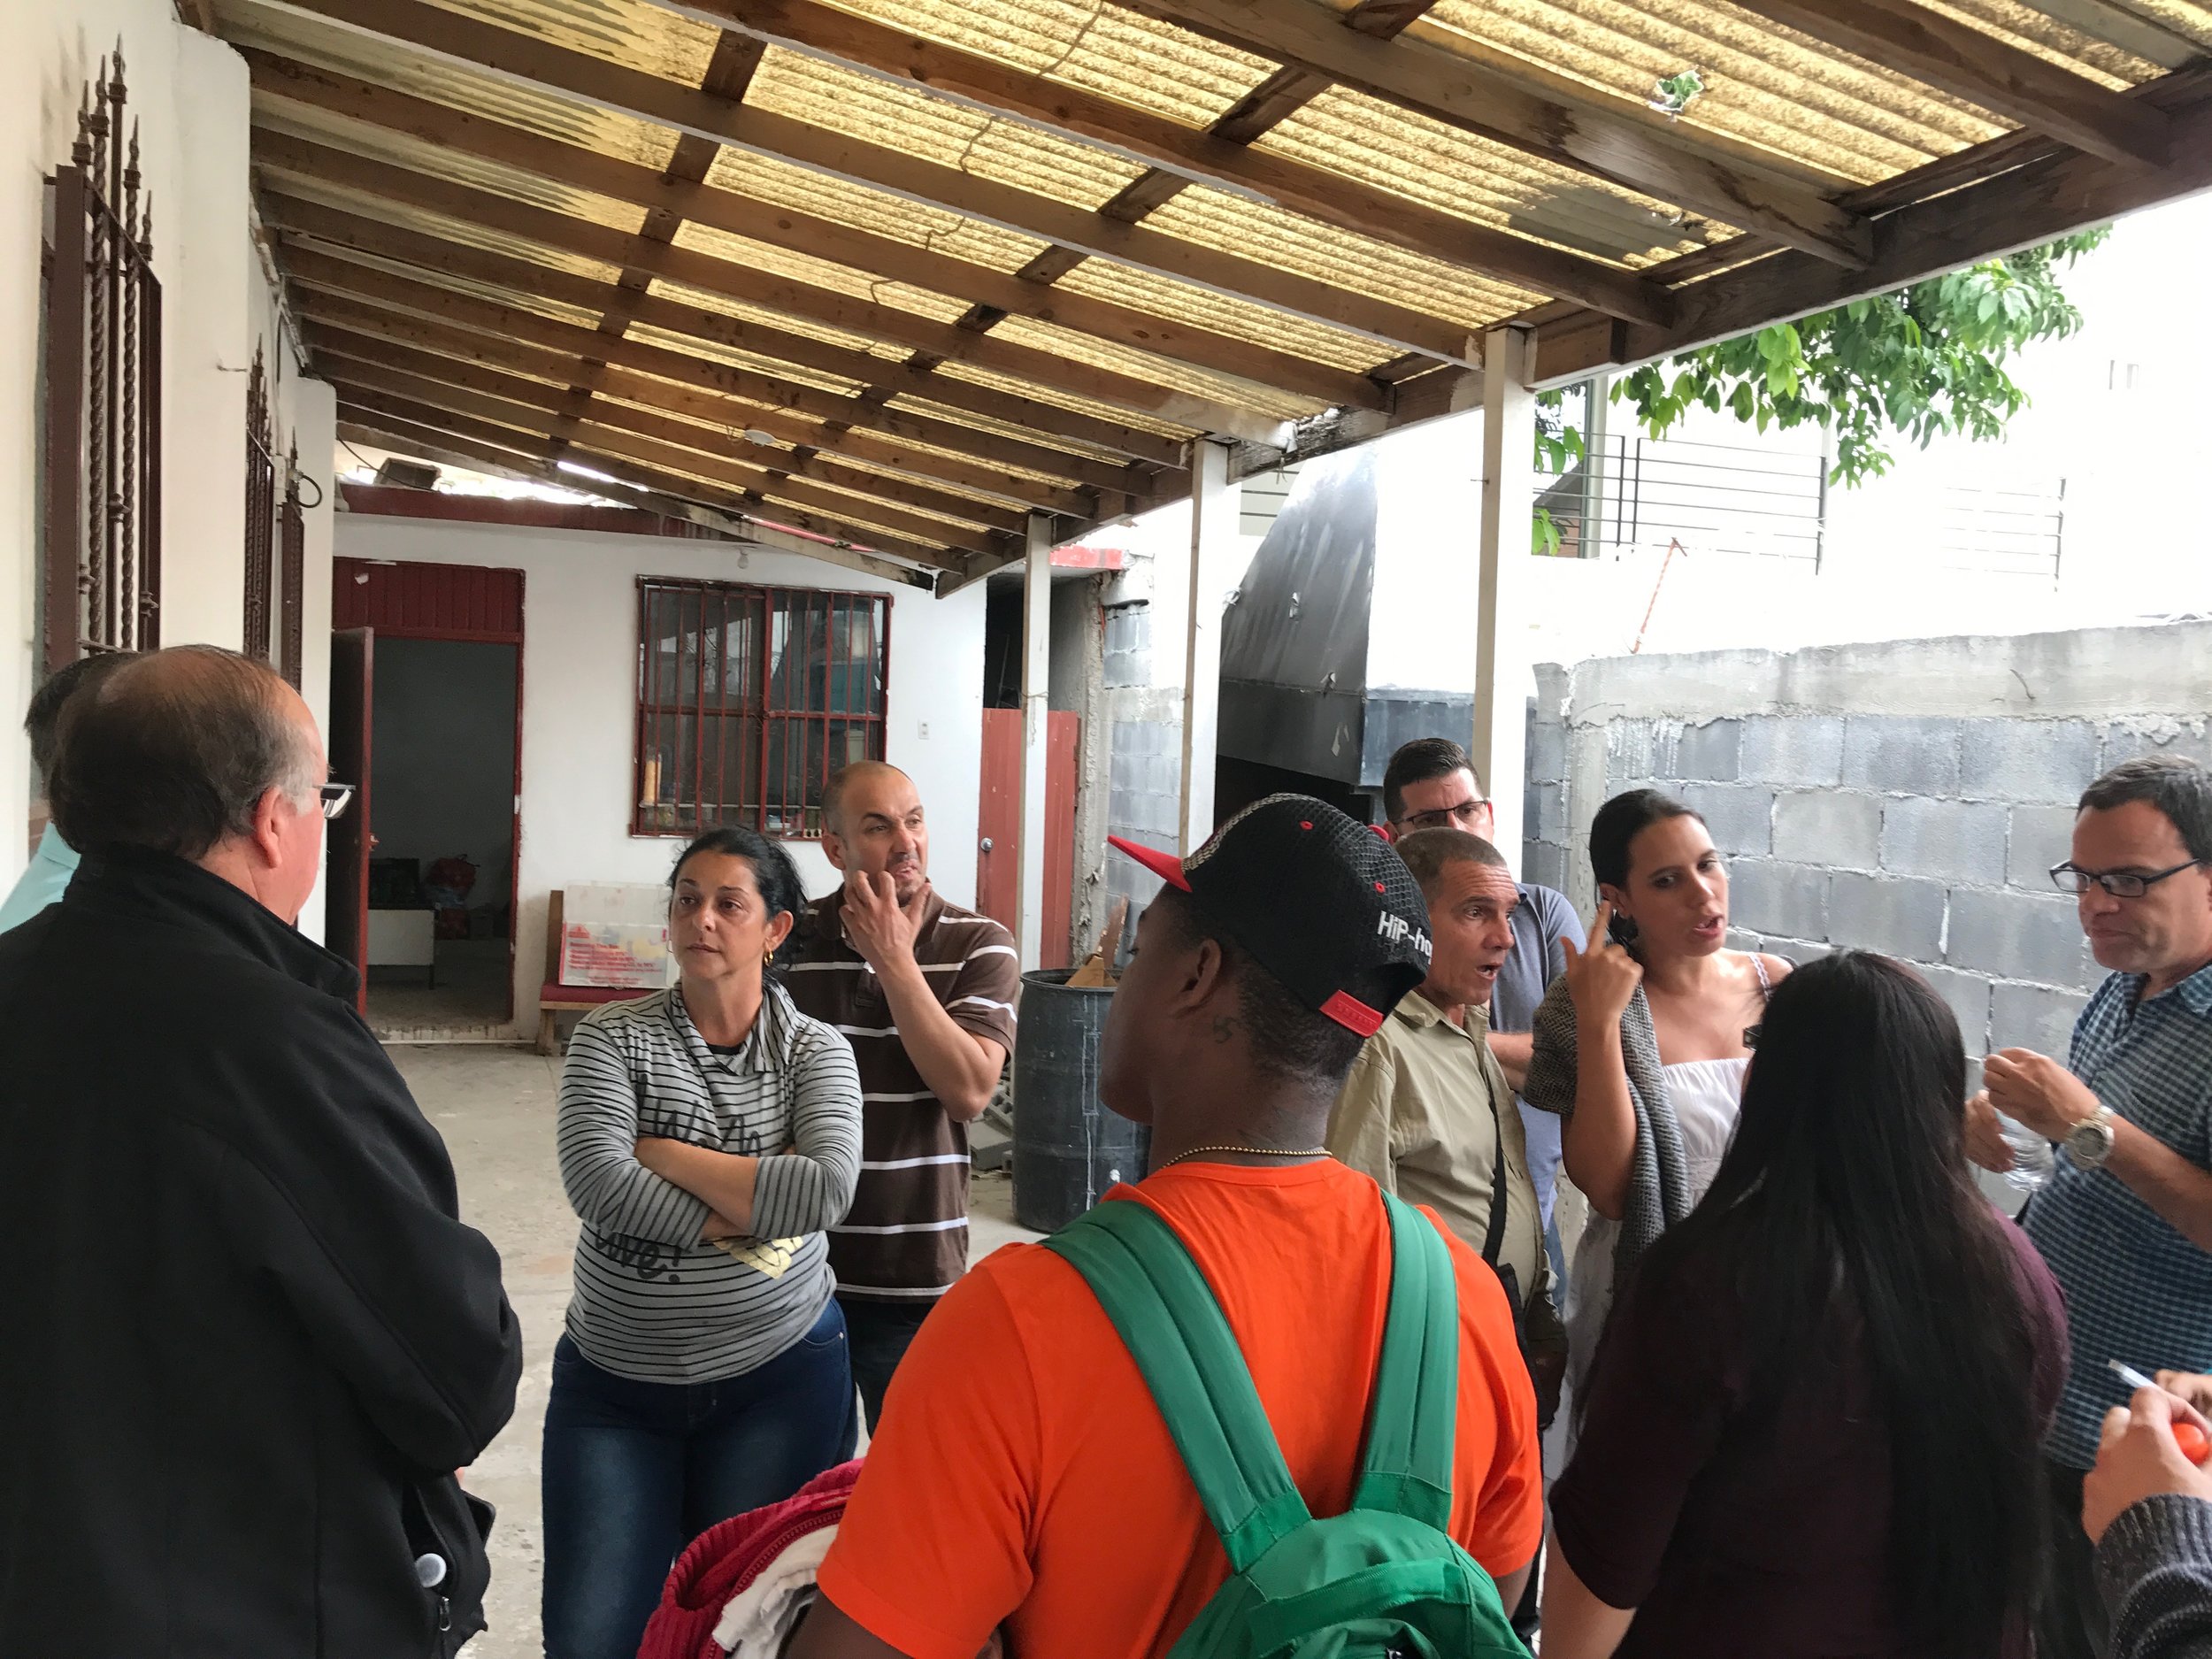  After unloading supplies at the church, the Cuban migrant community and Methodist and Baptists discuss the day’s activities. After this activity, some of the group went to visit with the local immigration and refugee services office to gain insight 